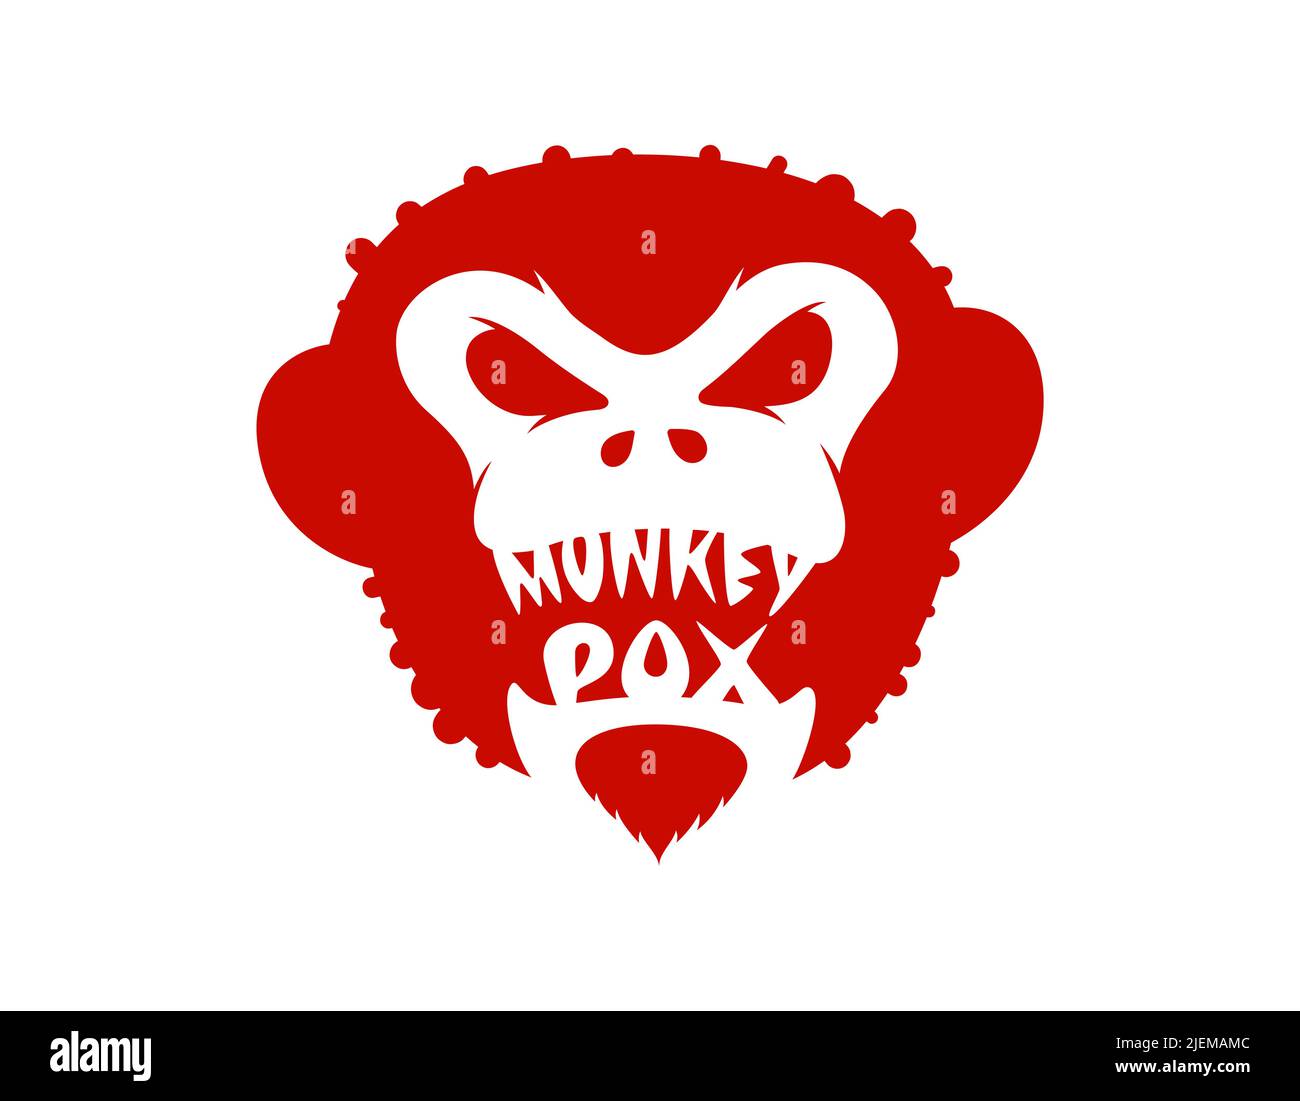 Monkey red head with blisters and monkeypox inscription concept. Primat pox infectious disease outbreak lettering on face. Angry gorilla sign. Ferocious ape MPV MPV dangerous pandemic vector symbol Stock Vector